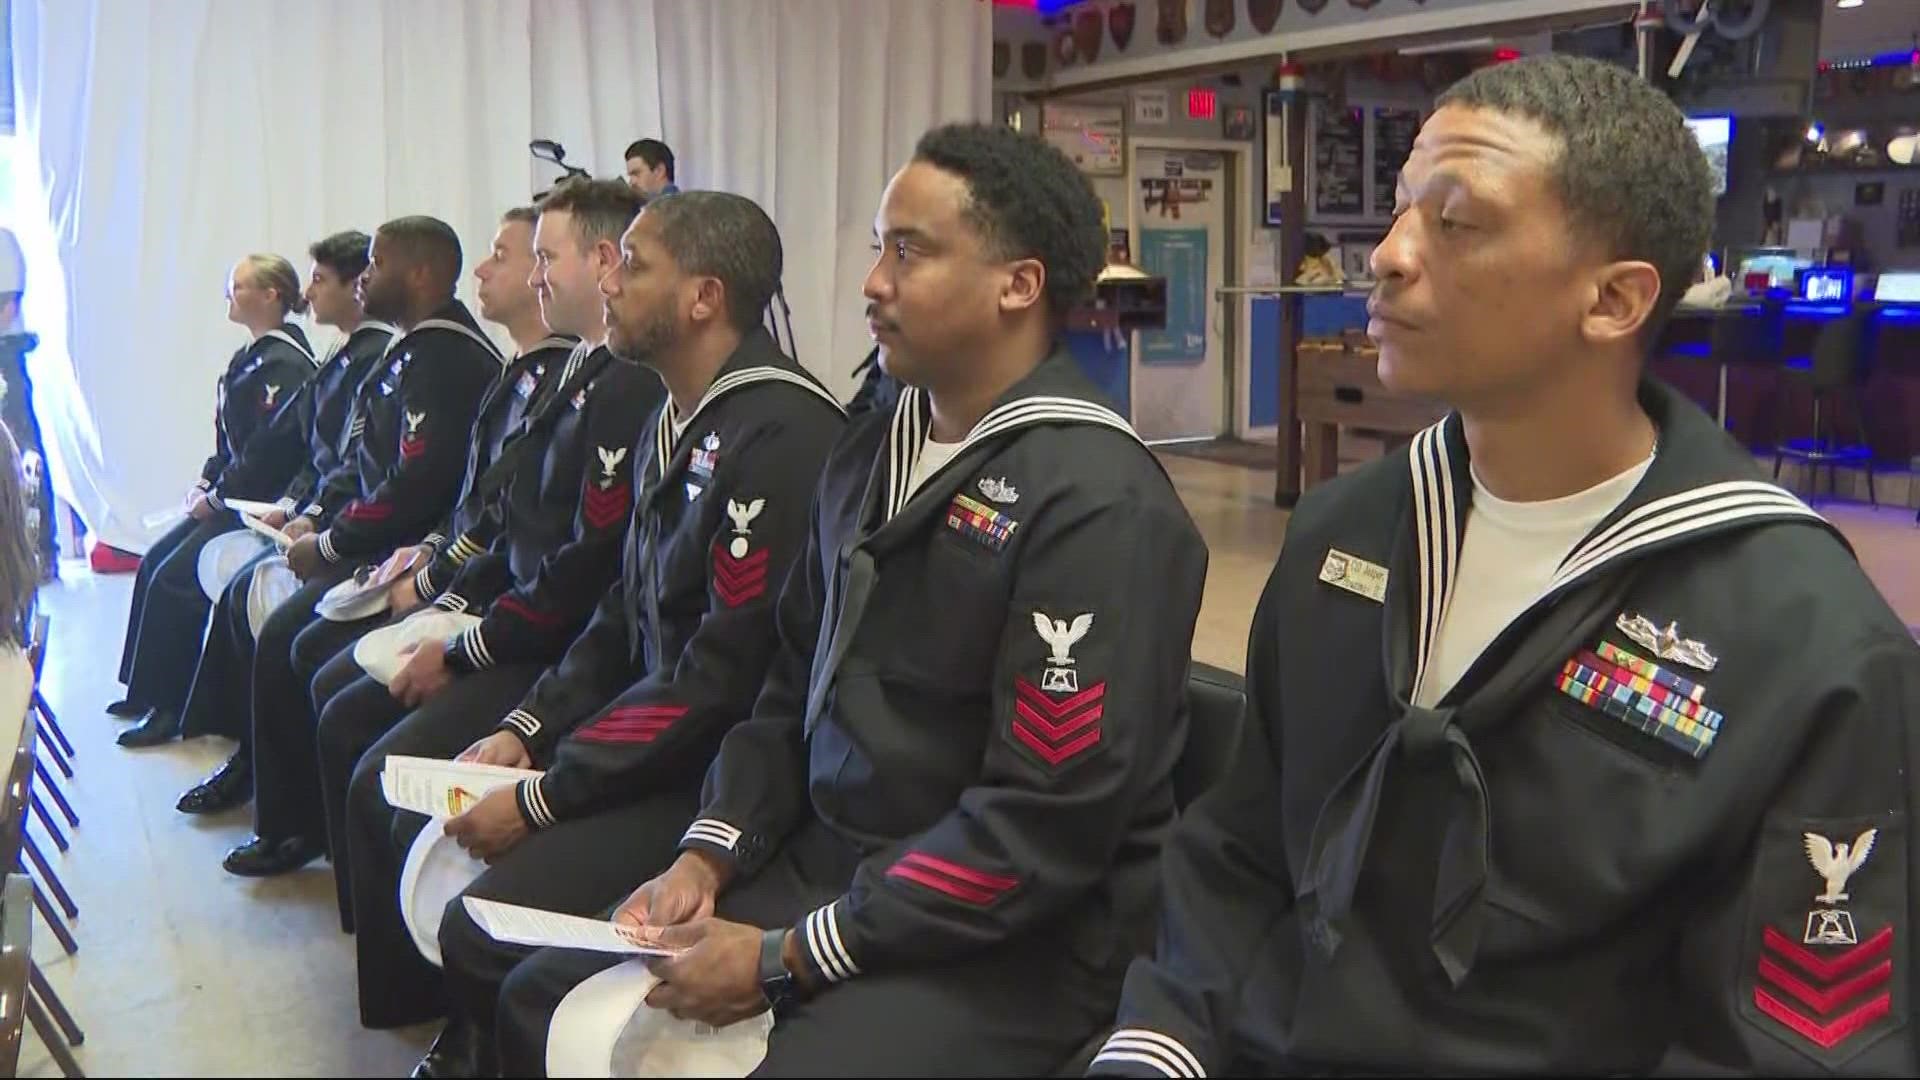 Military members in Jacksonville gathered to reflect in the lives lost during the attack on Pearl Harbor.